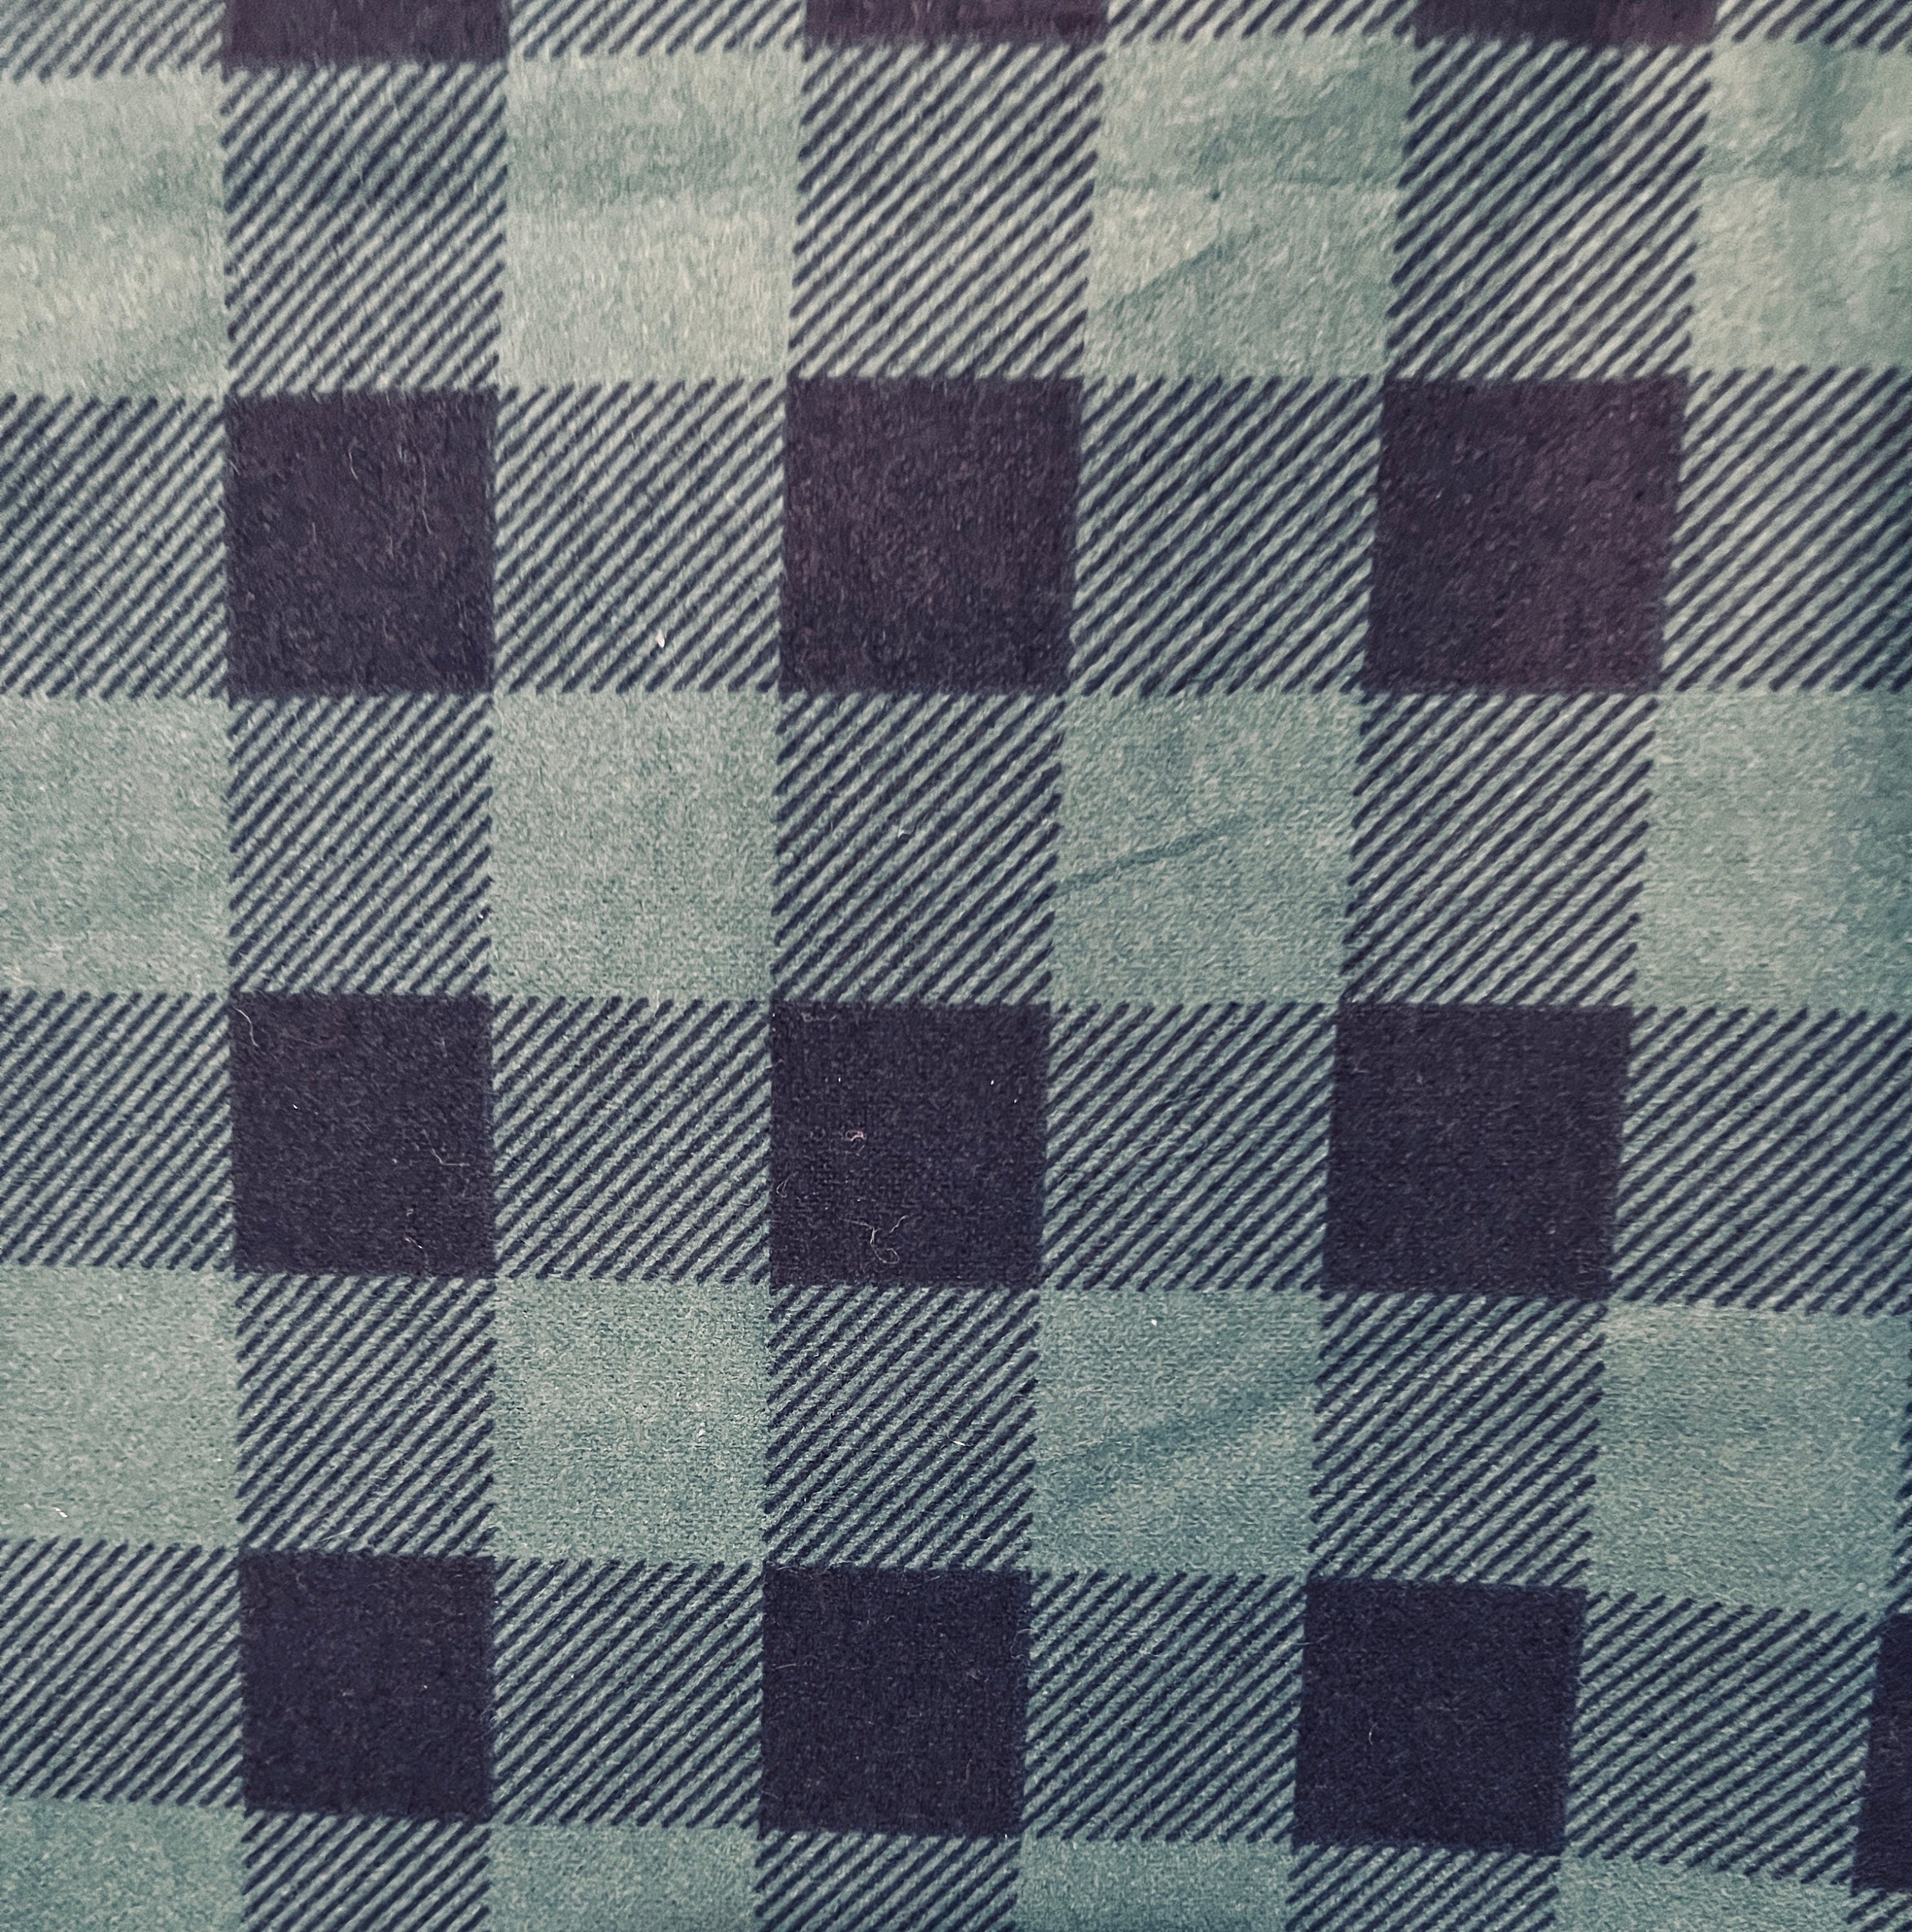 Flannel Fabric By The Yard: Cotton, Plaid, Quilting - JOANN and